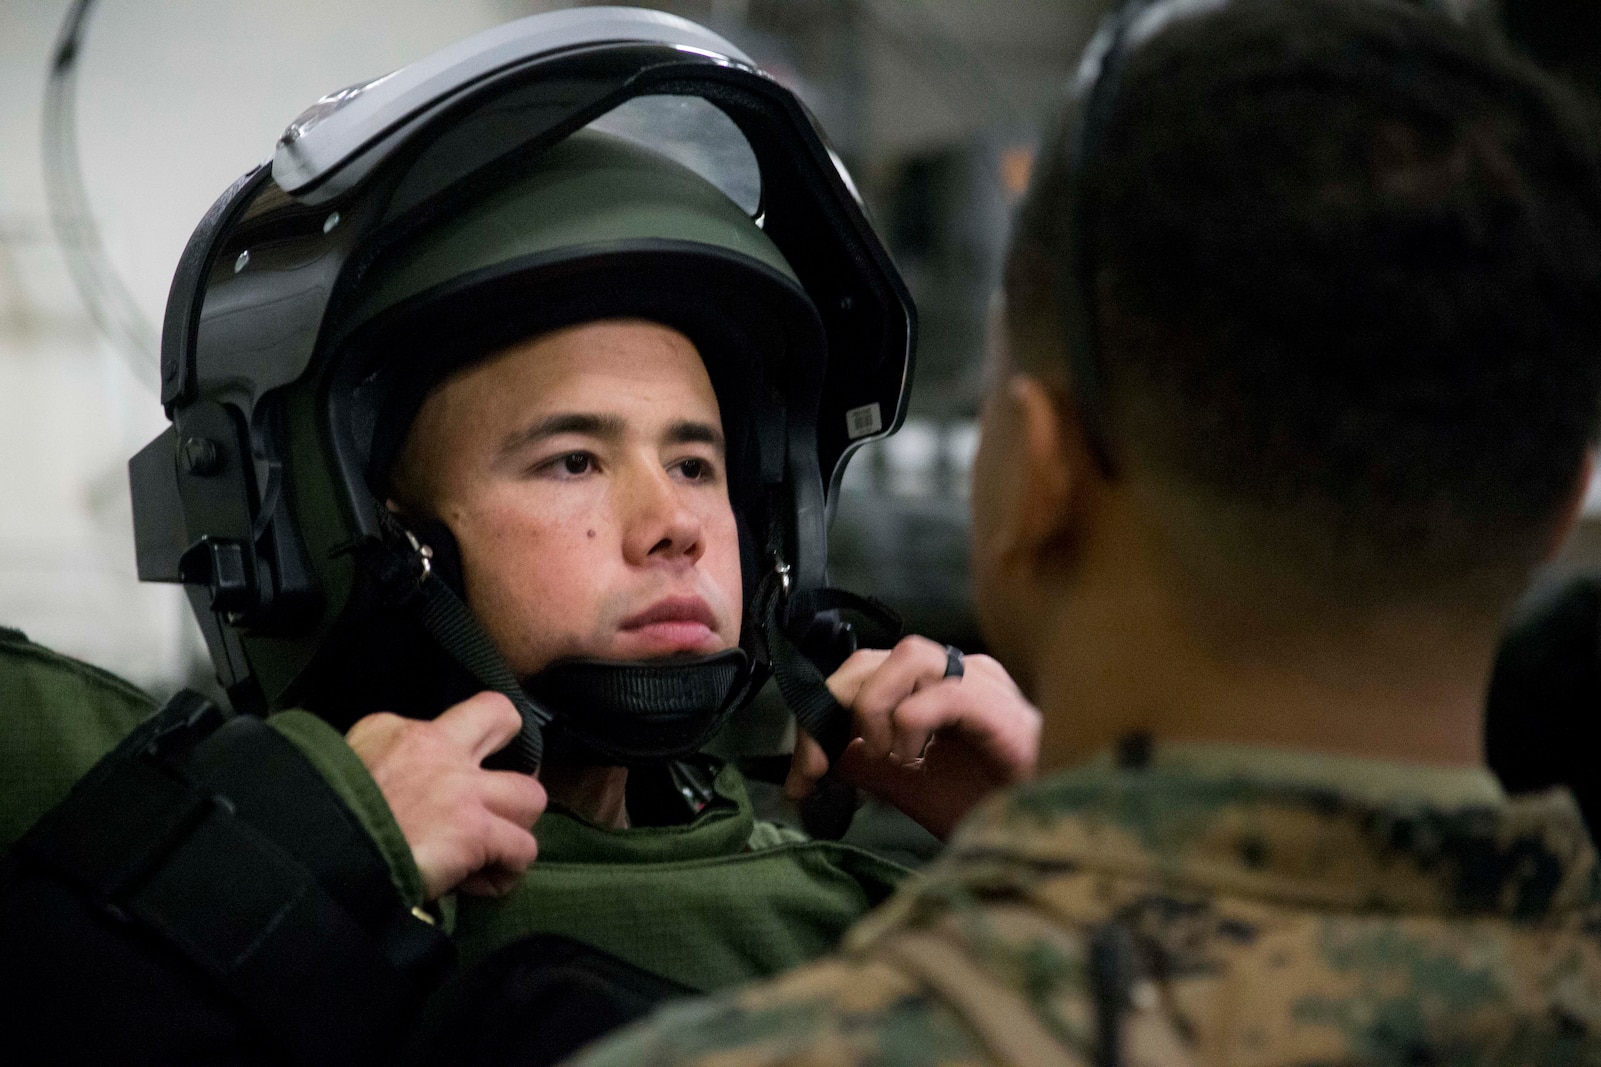 CWO2 Samuel Beltram, an Explosive Ordnance Disposal officer with Combat Logistics Battalion 31, 31st Marine Expeditionary Unit, adjusts his helmet as he prepares for a mock EOD sweep aboard the USS Wasp (LHD-1) while underway in the Pacific Ocean, April 3, 2018.